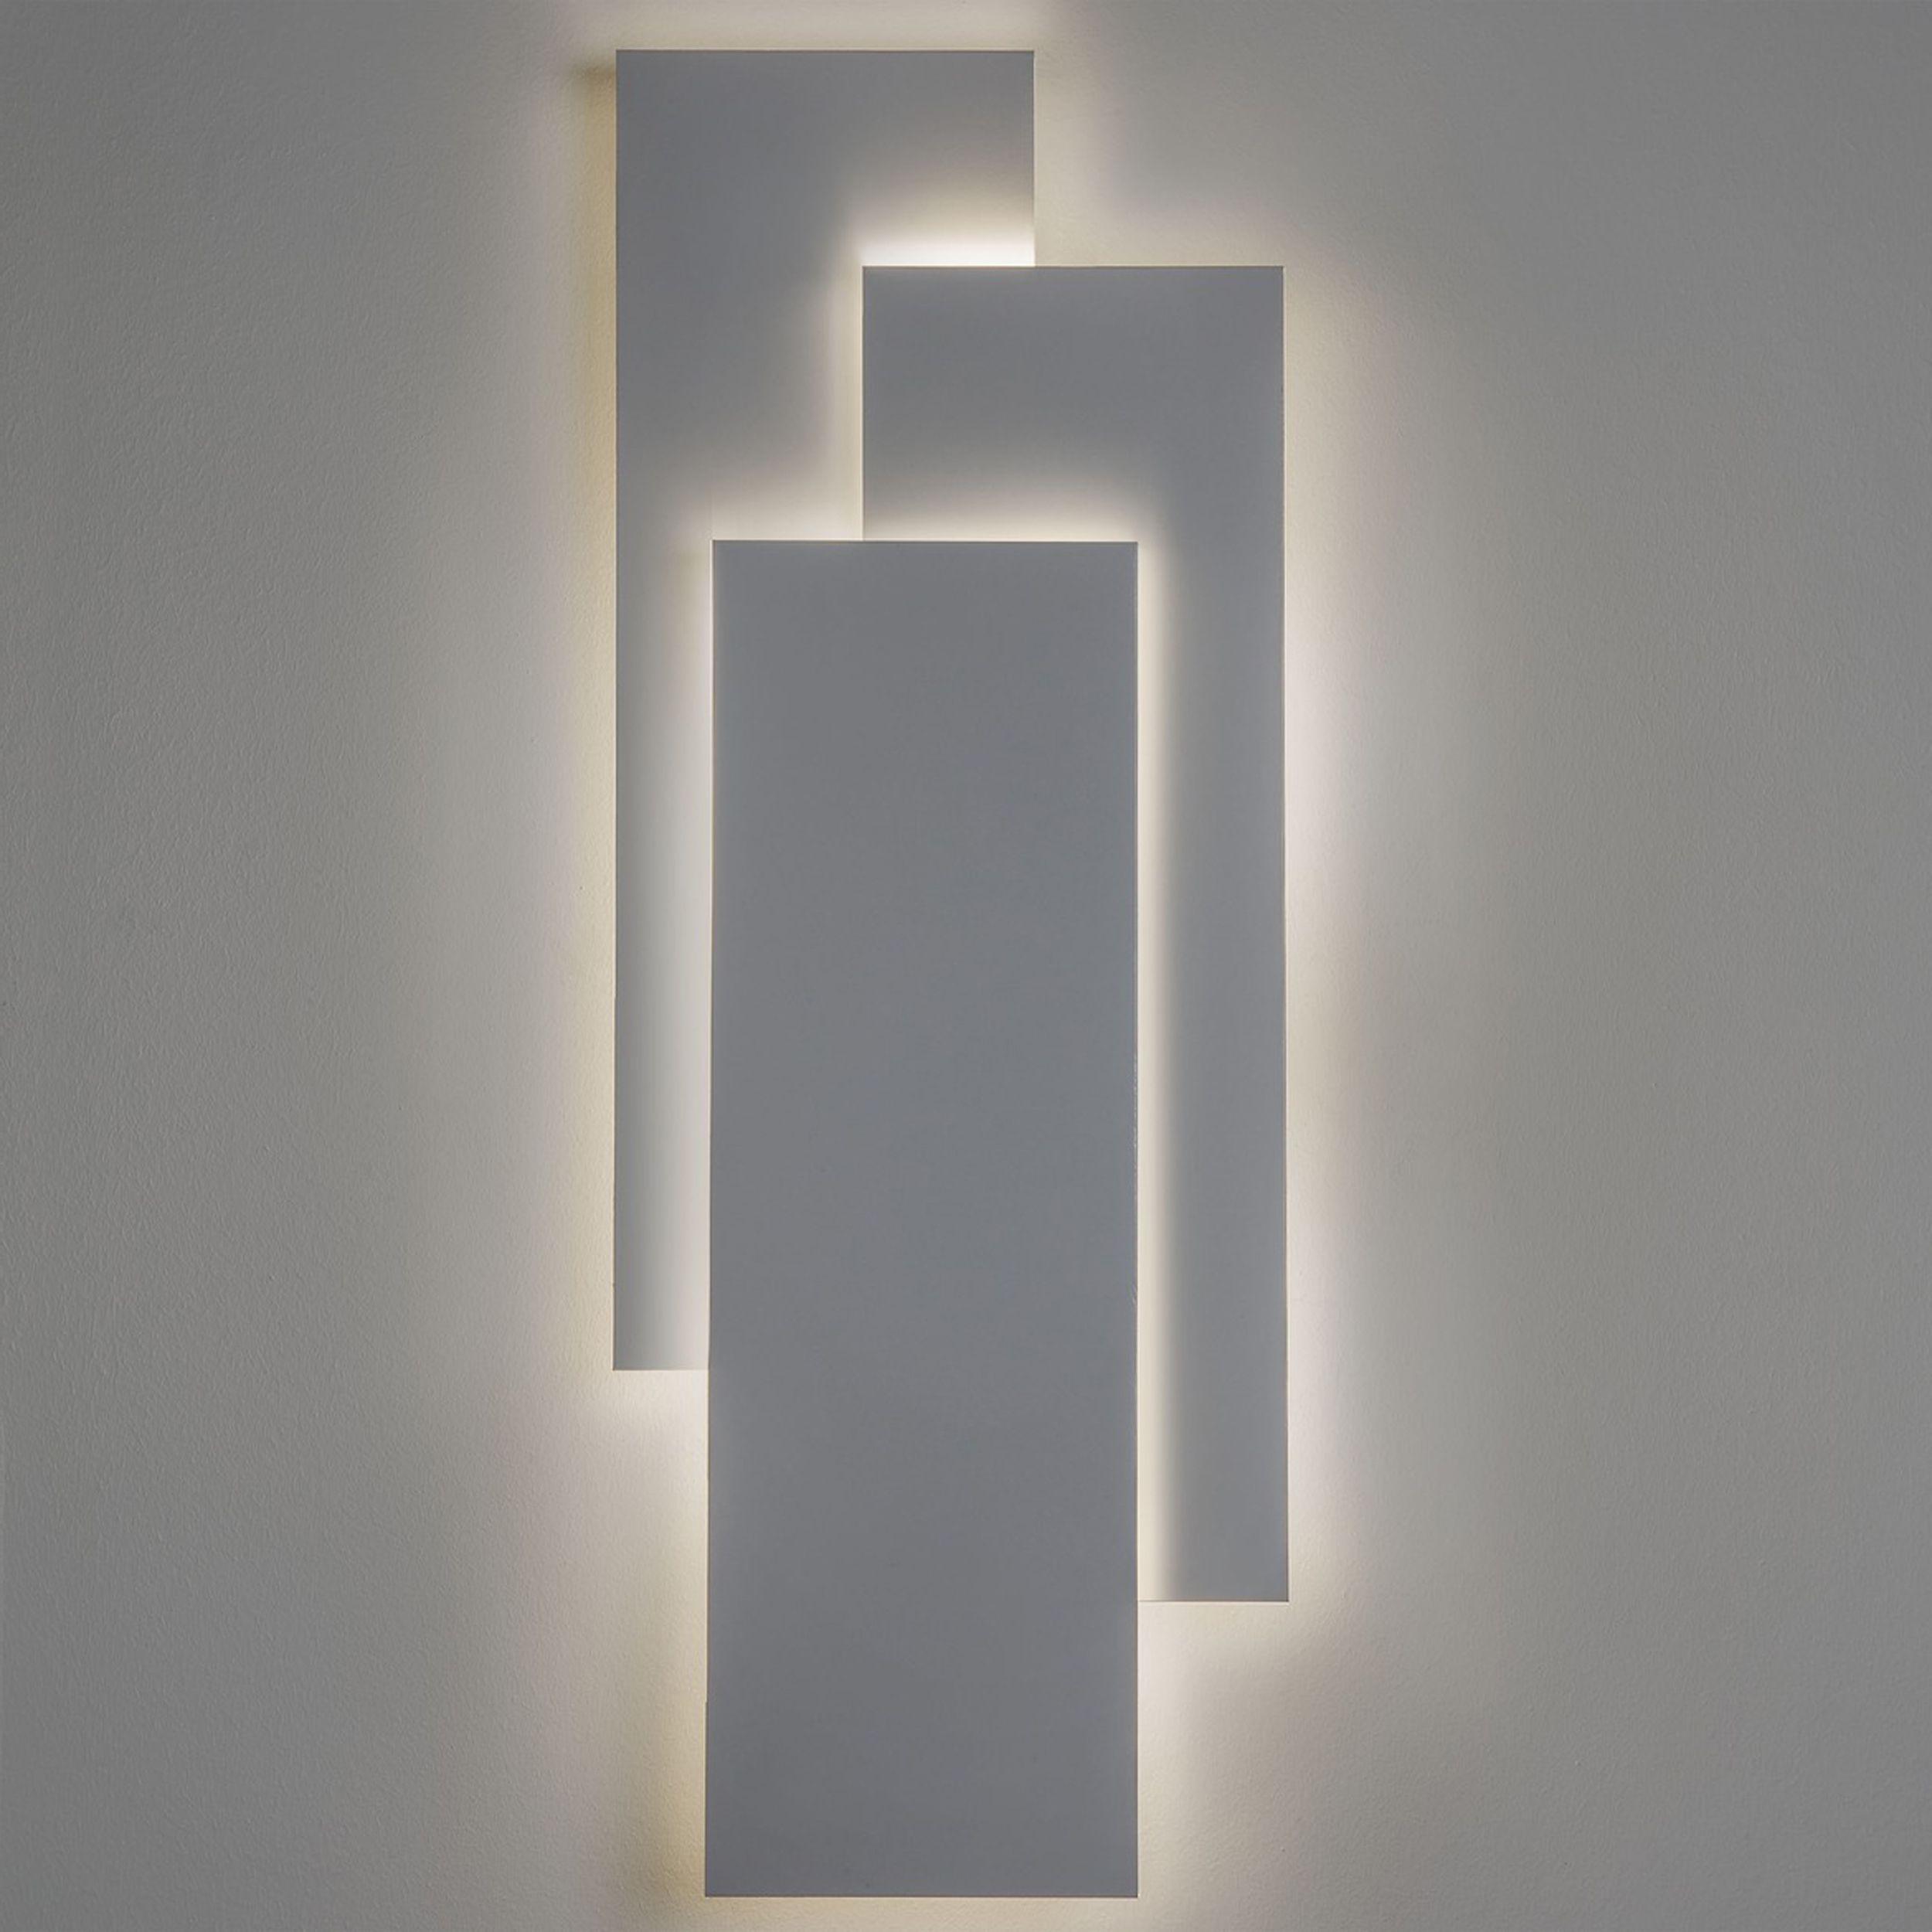 Edge Lit Square Led Wall Mirrors With Famous Edge 560 Led Wall Light – Buy Online Now At All Square Lighting (View 9 of 15)